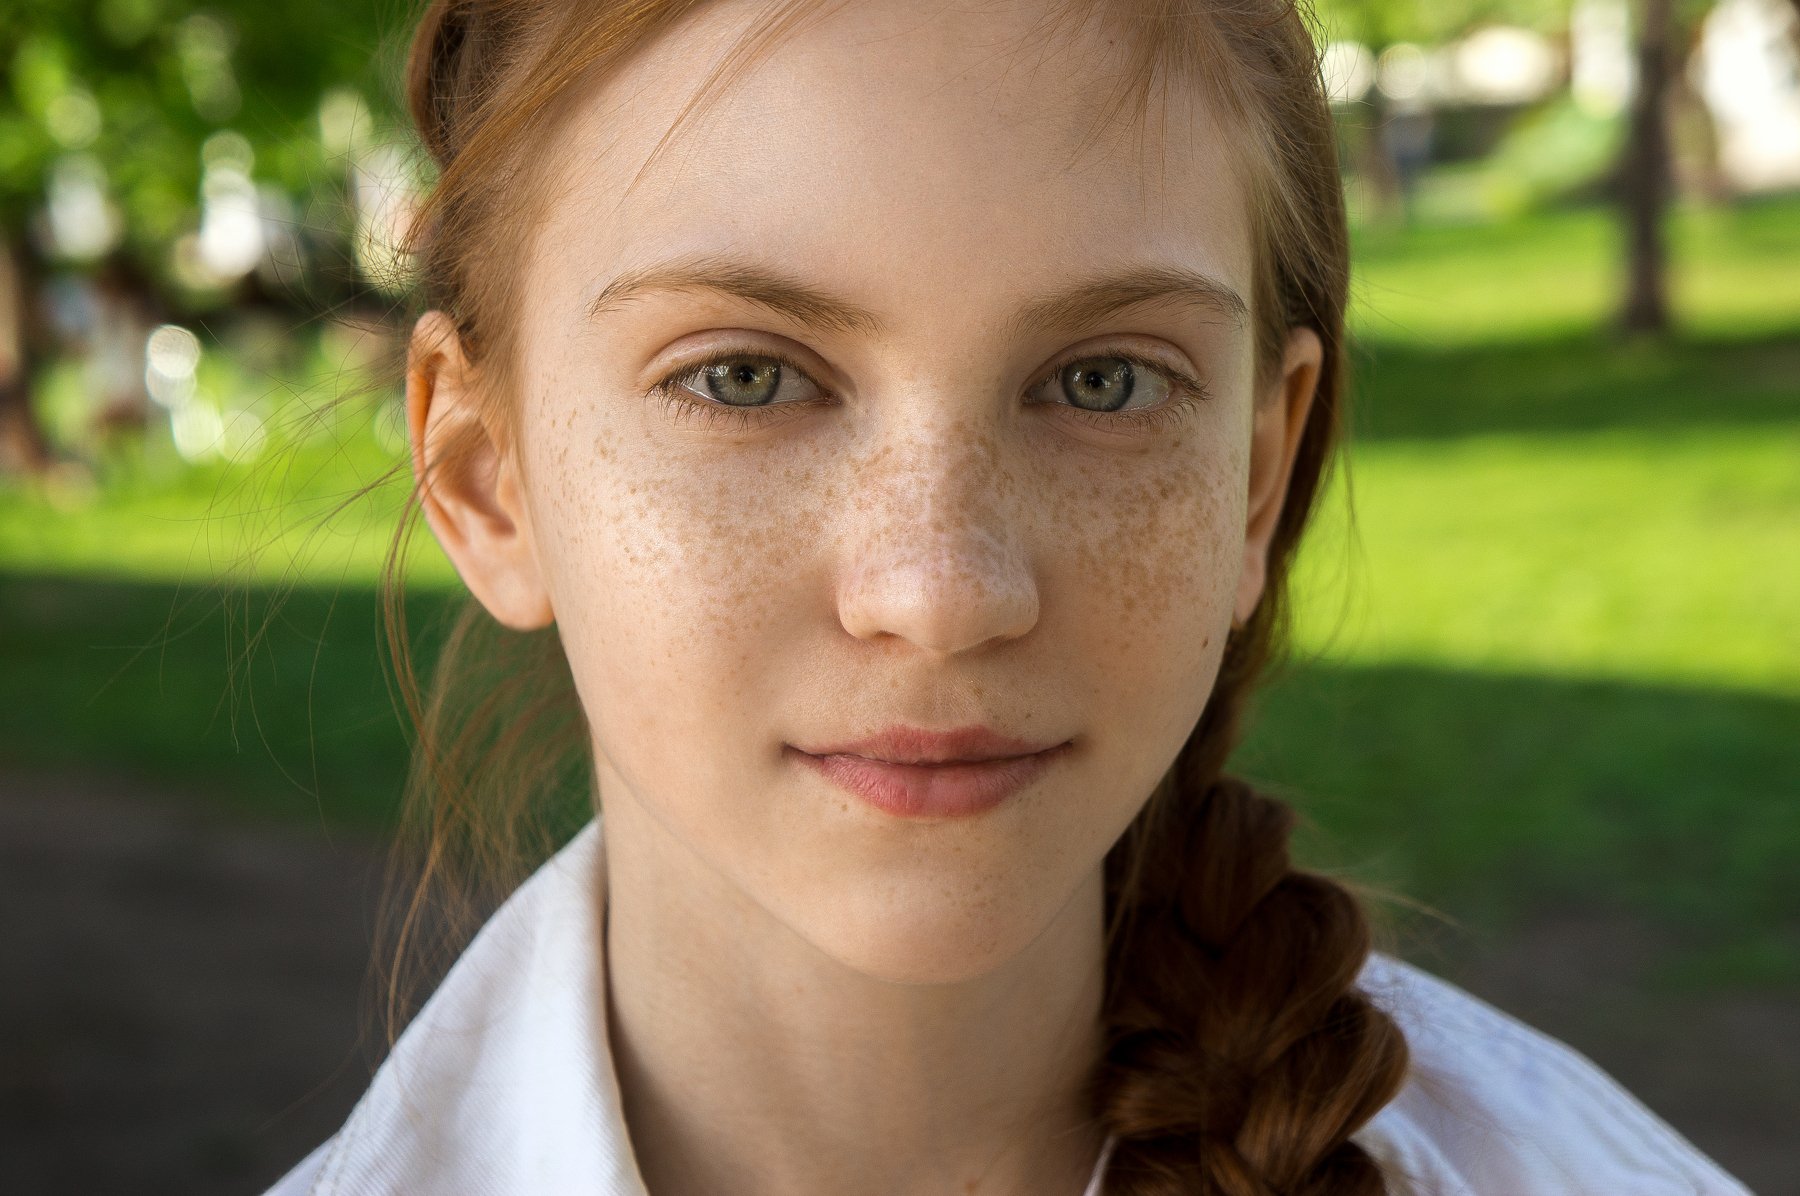 freckles, sunny, warm, summer, sun, green eyes, young model, Наташа Янкелевич